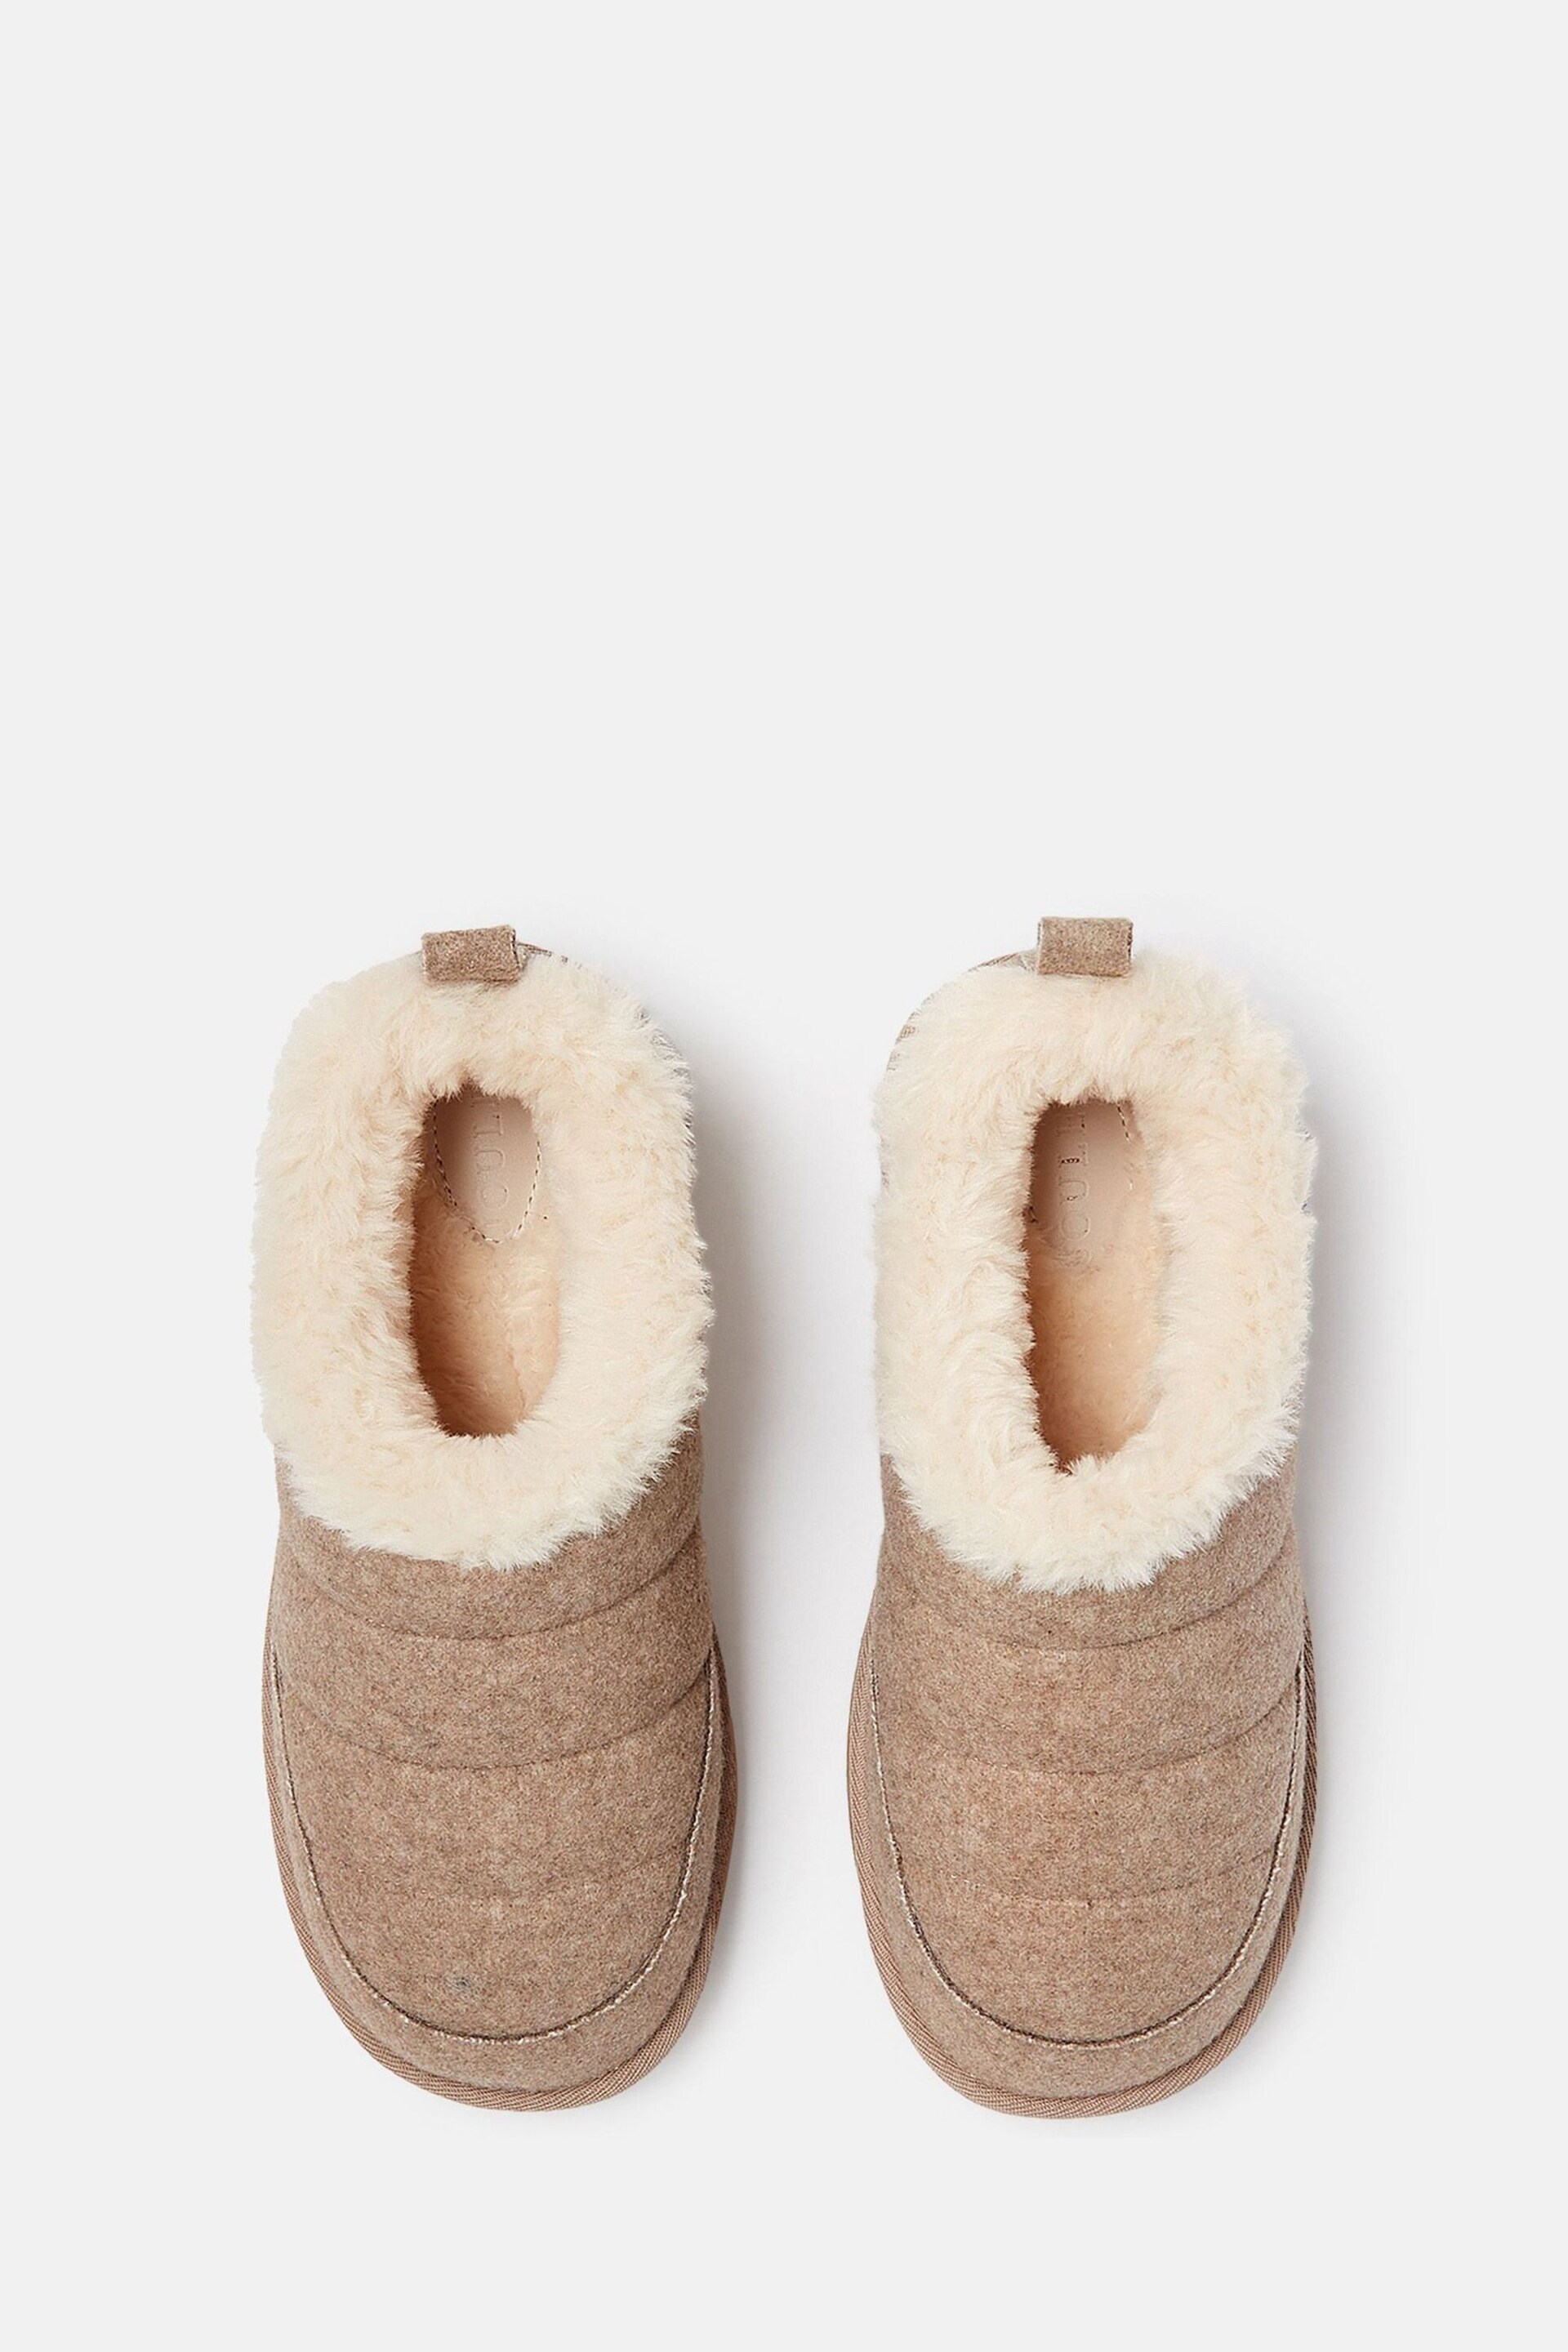 Joules Women's Lazydays Oatmeal Faux Fur Lined Slippers - Image 2 of 6